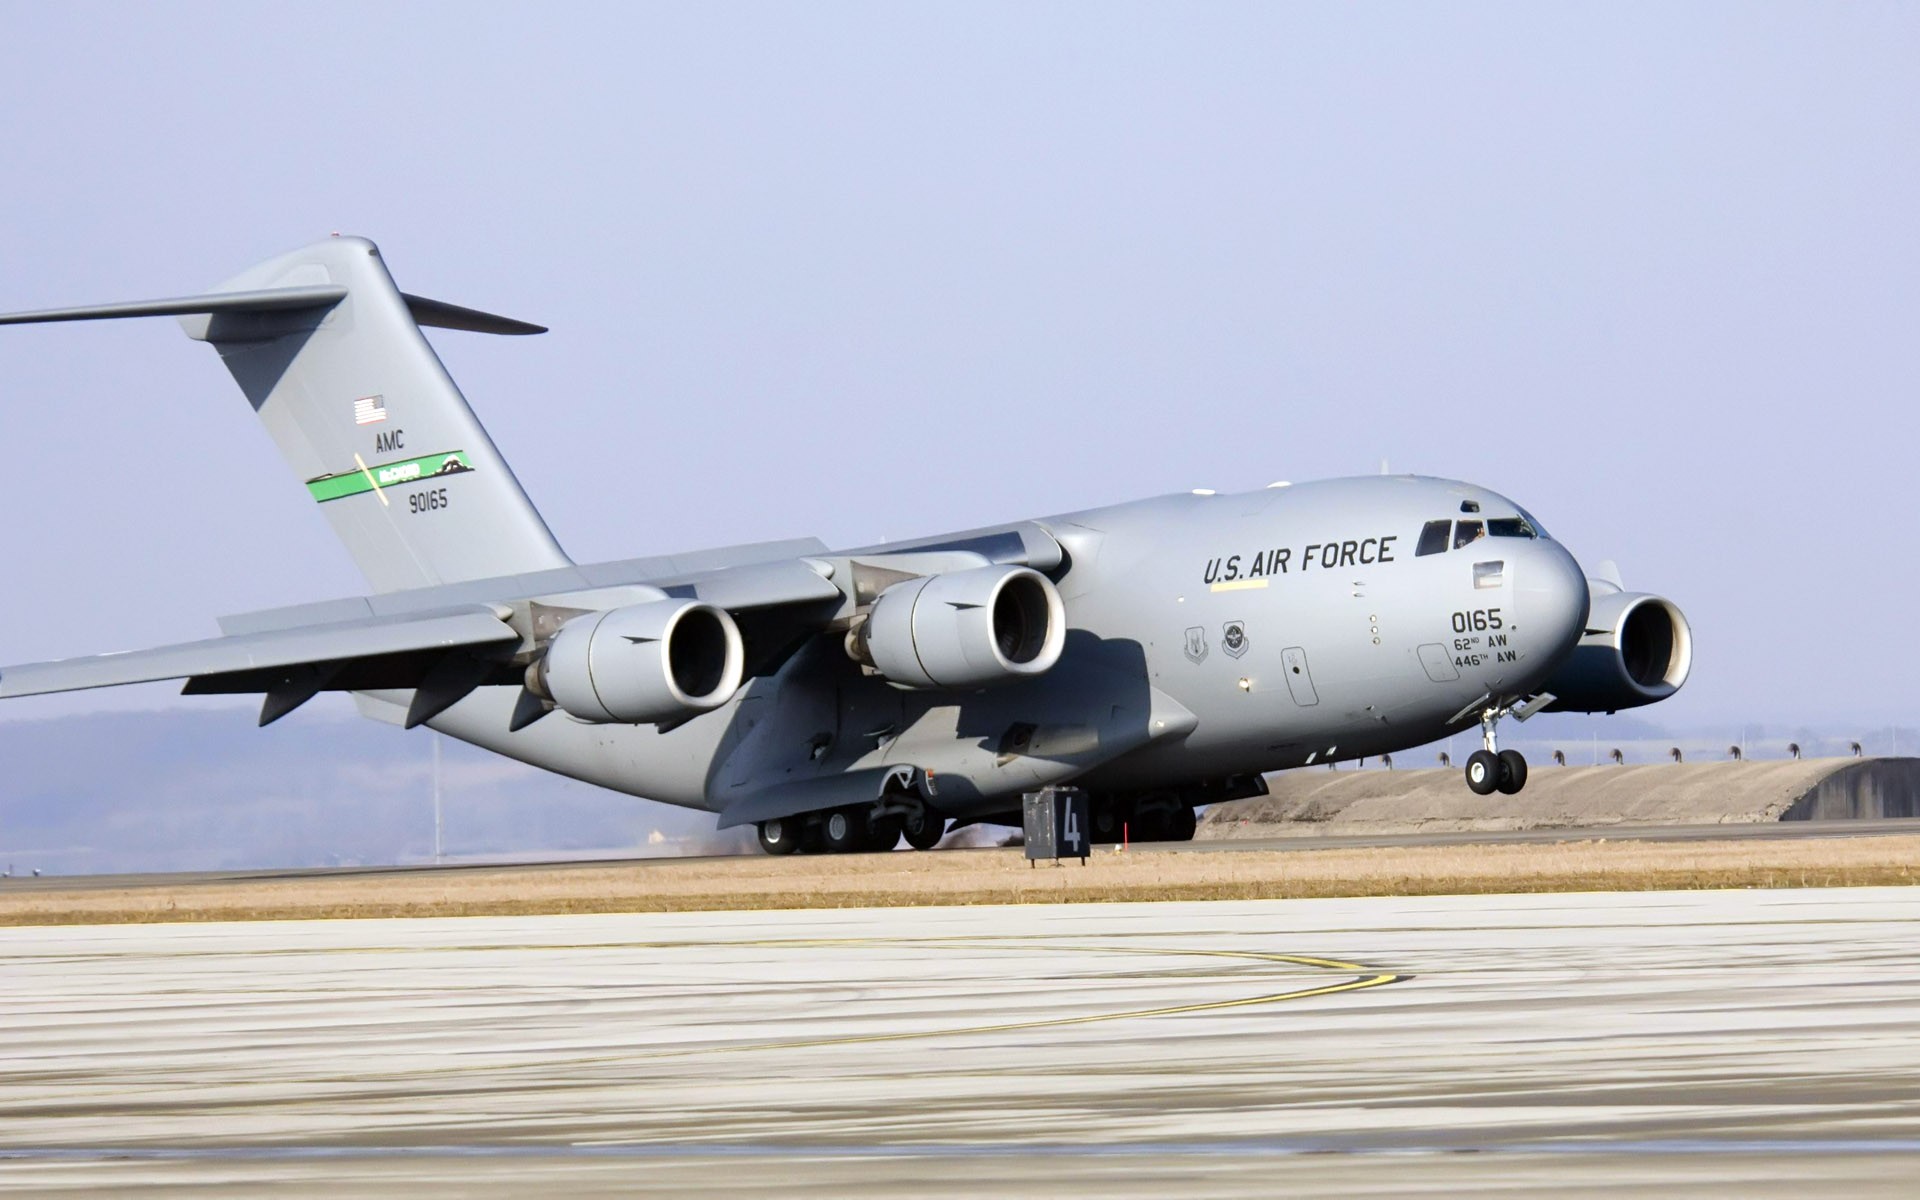 General 1920x1200 landing US Air Force vehicle aircraft numbers military military aircraft Boeing C-17 Globemaster III Boeing American aircraft